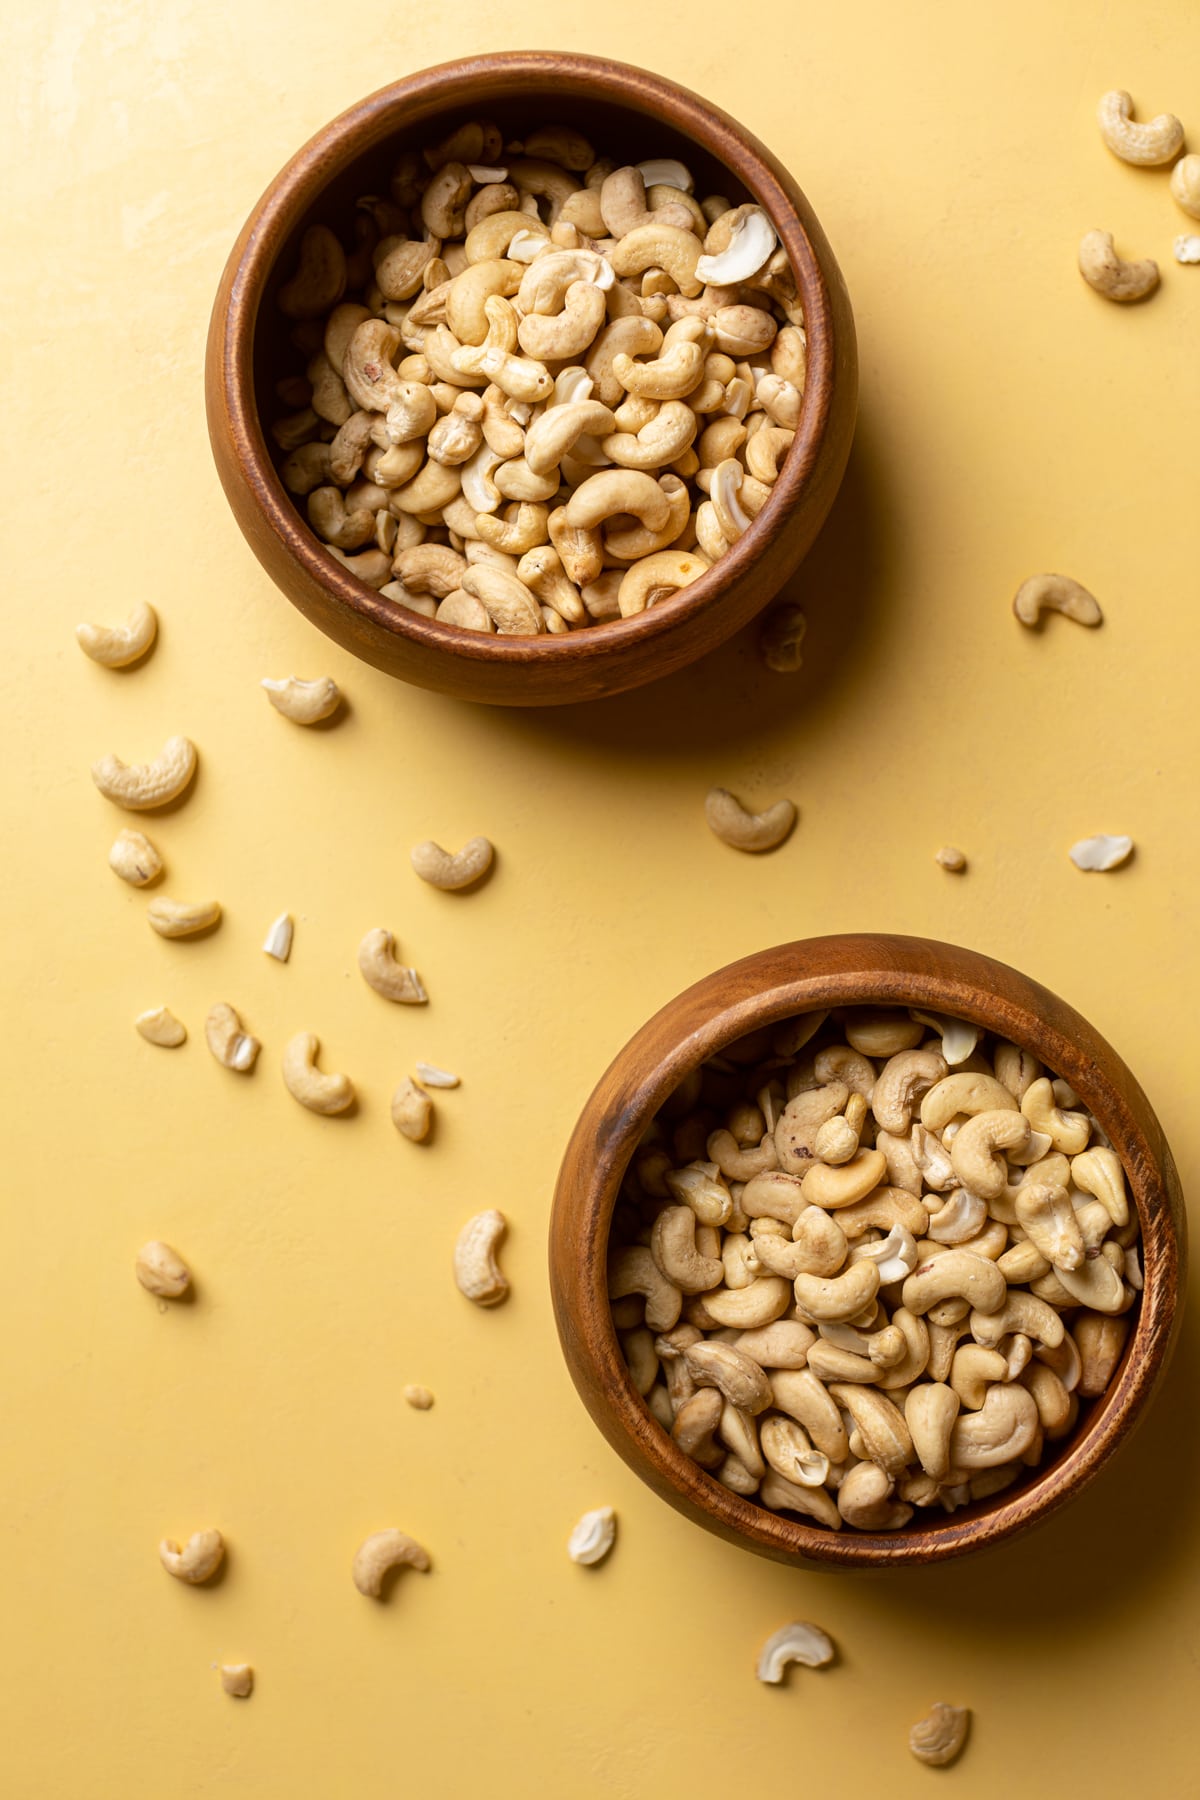 Two wooden bowls of cashews